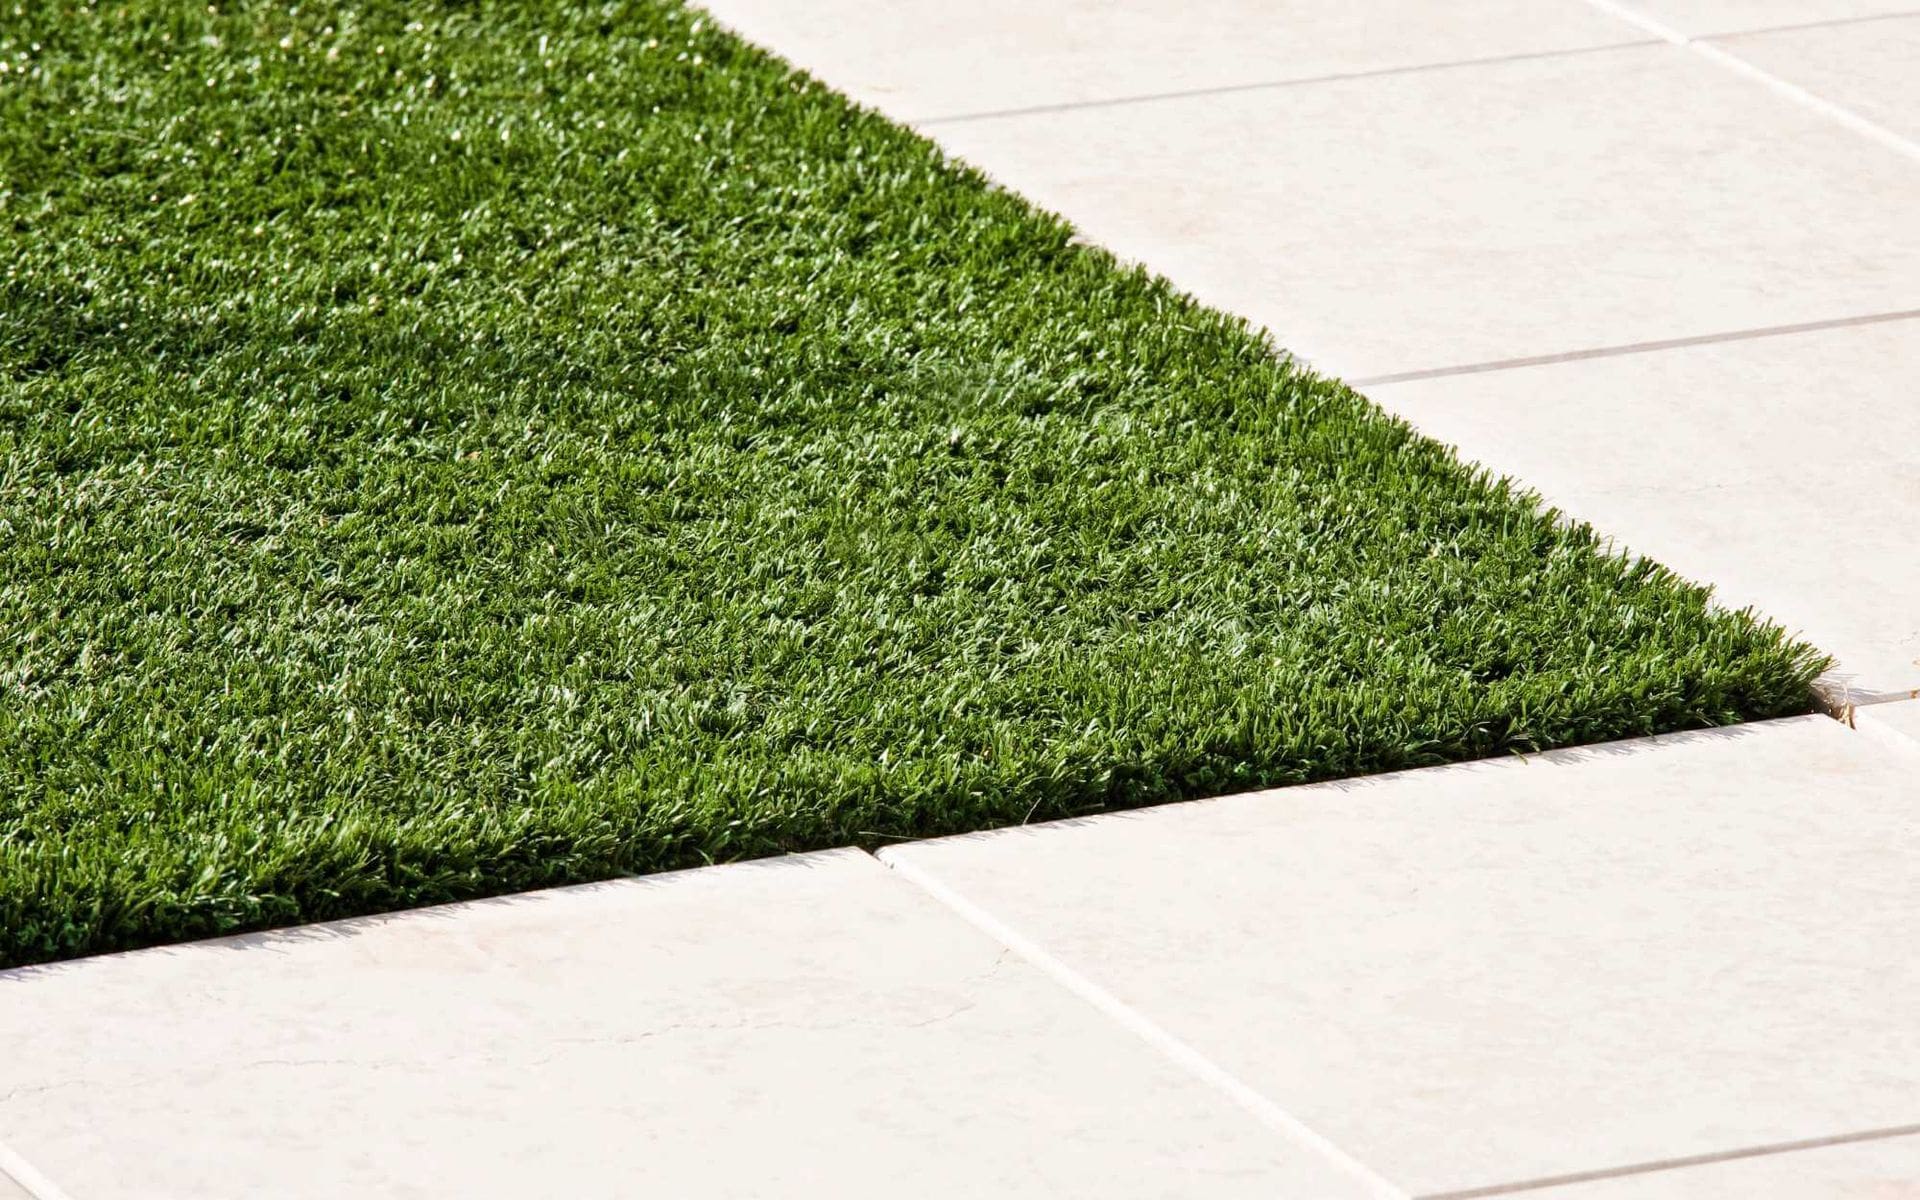 A close-up view of a neatly cut green lawn adjacent to white, tiled flooring. The contrast between the lush grass's texture and the smooth, light-colored tiles is clearly visible. West Valley Concrete specializes in creating such seamless transitions with decorative concrete designs.